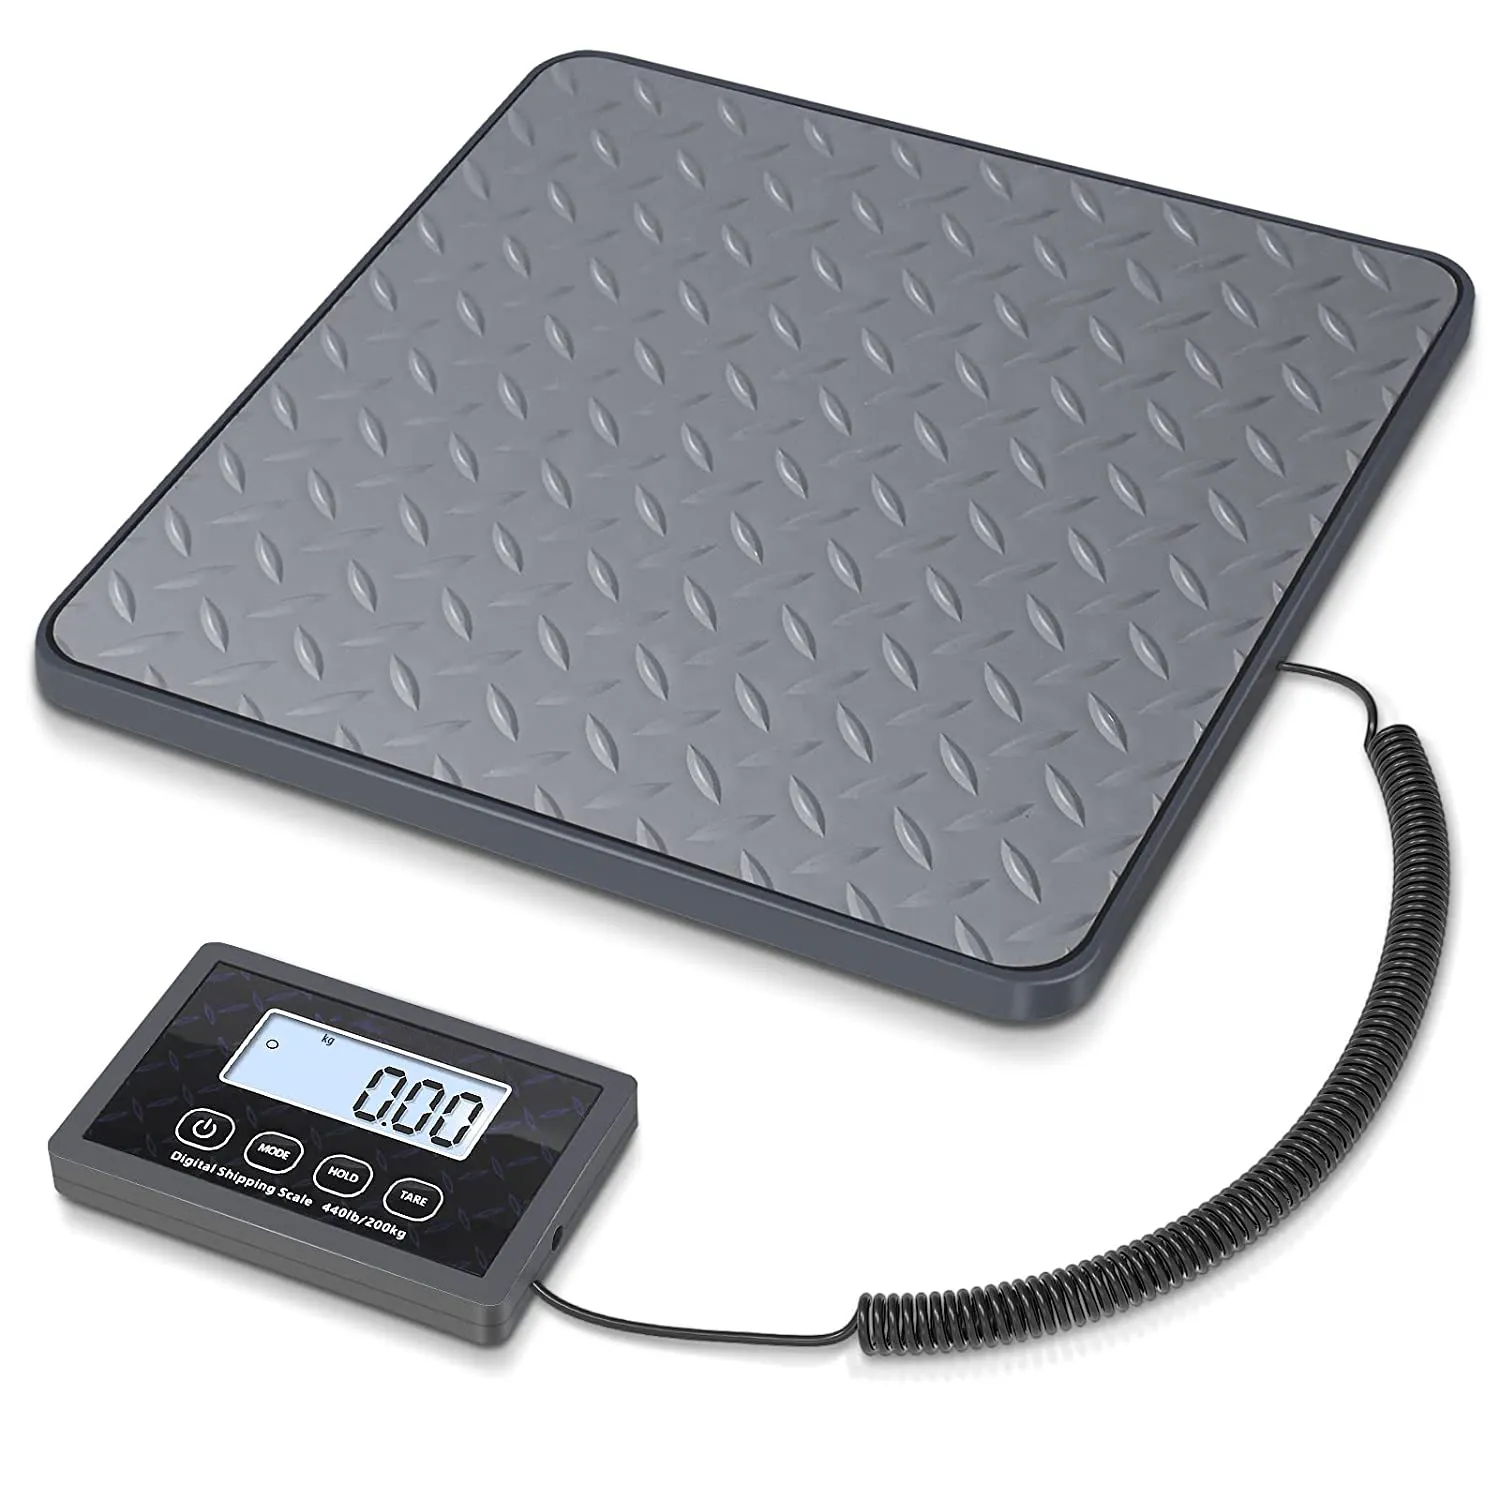 200kg/10g Heavy-Duty Digital Shipping Postal Scale Receiving Scale for Body Weight/Luggage/Packages/Small Pets/Warehouse/Market